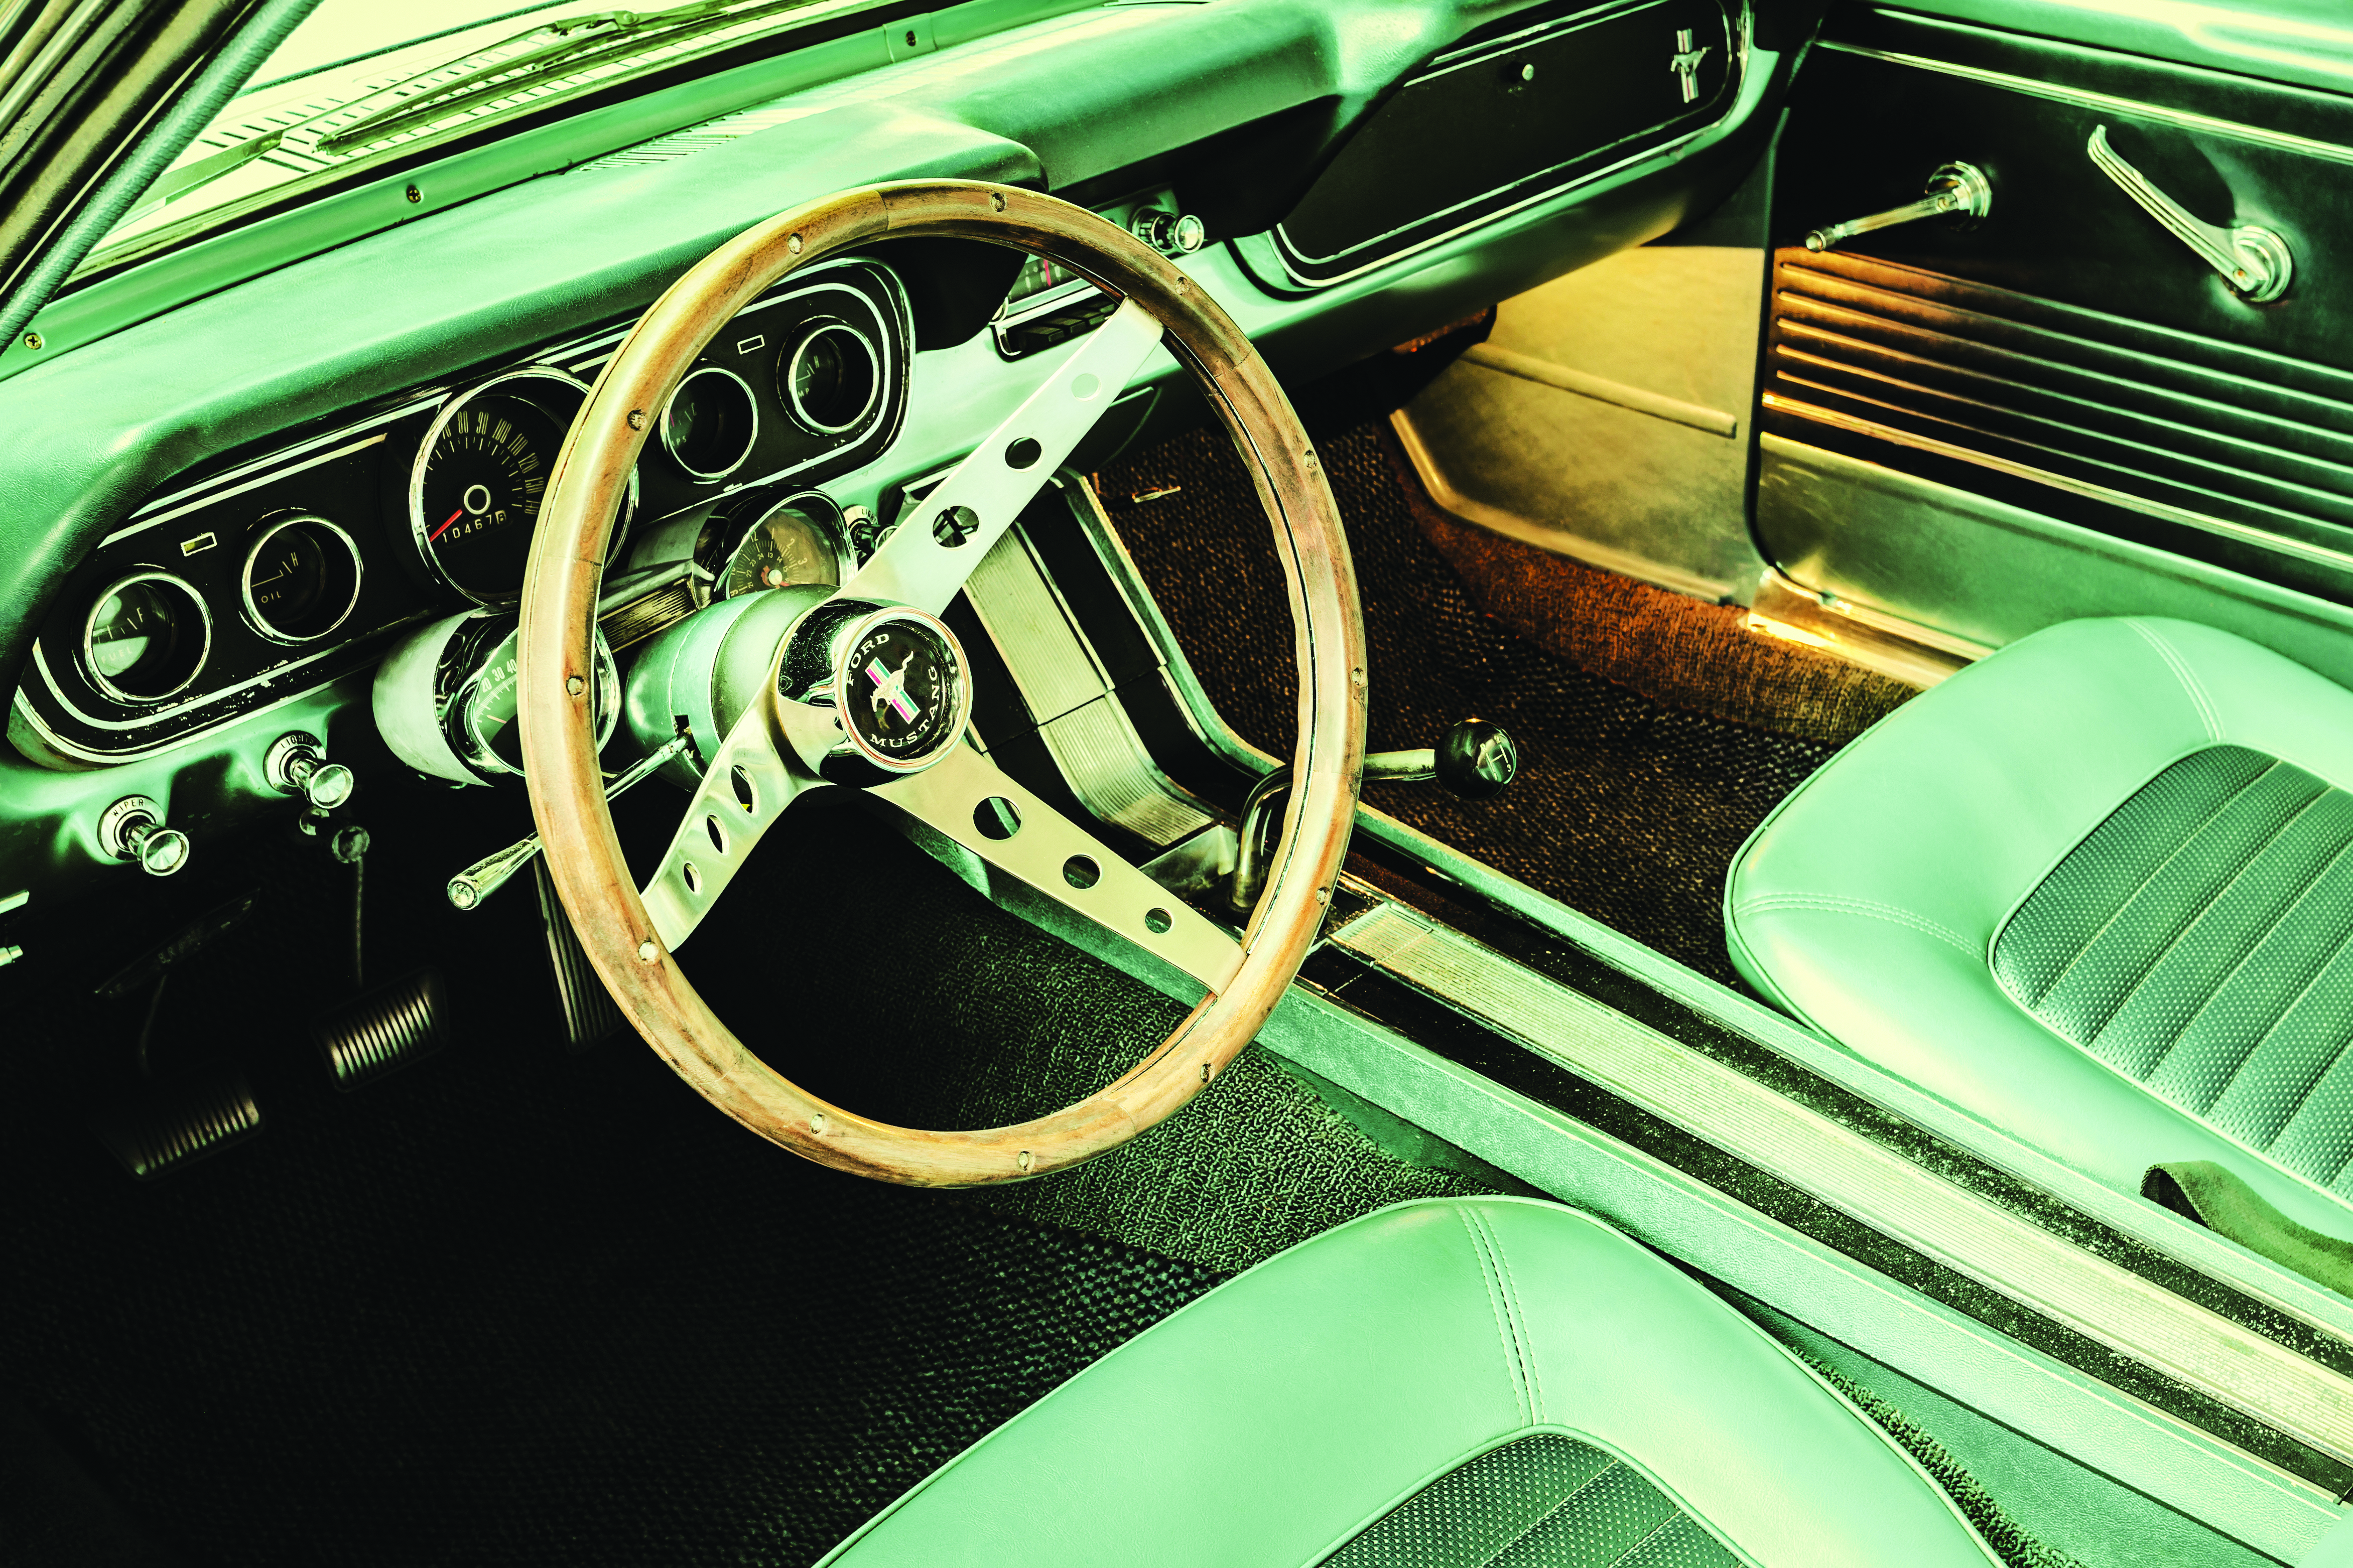 Going back in time in Oman with vintage cars